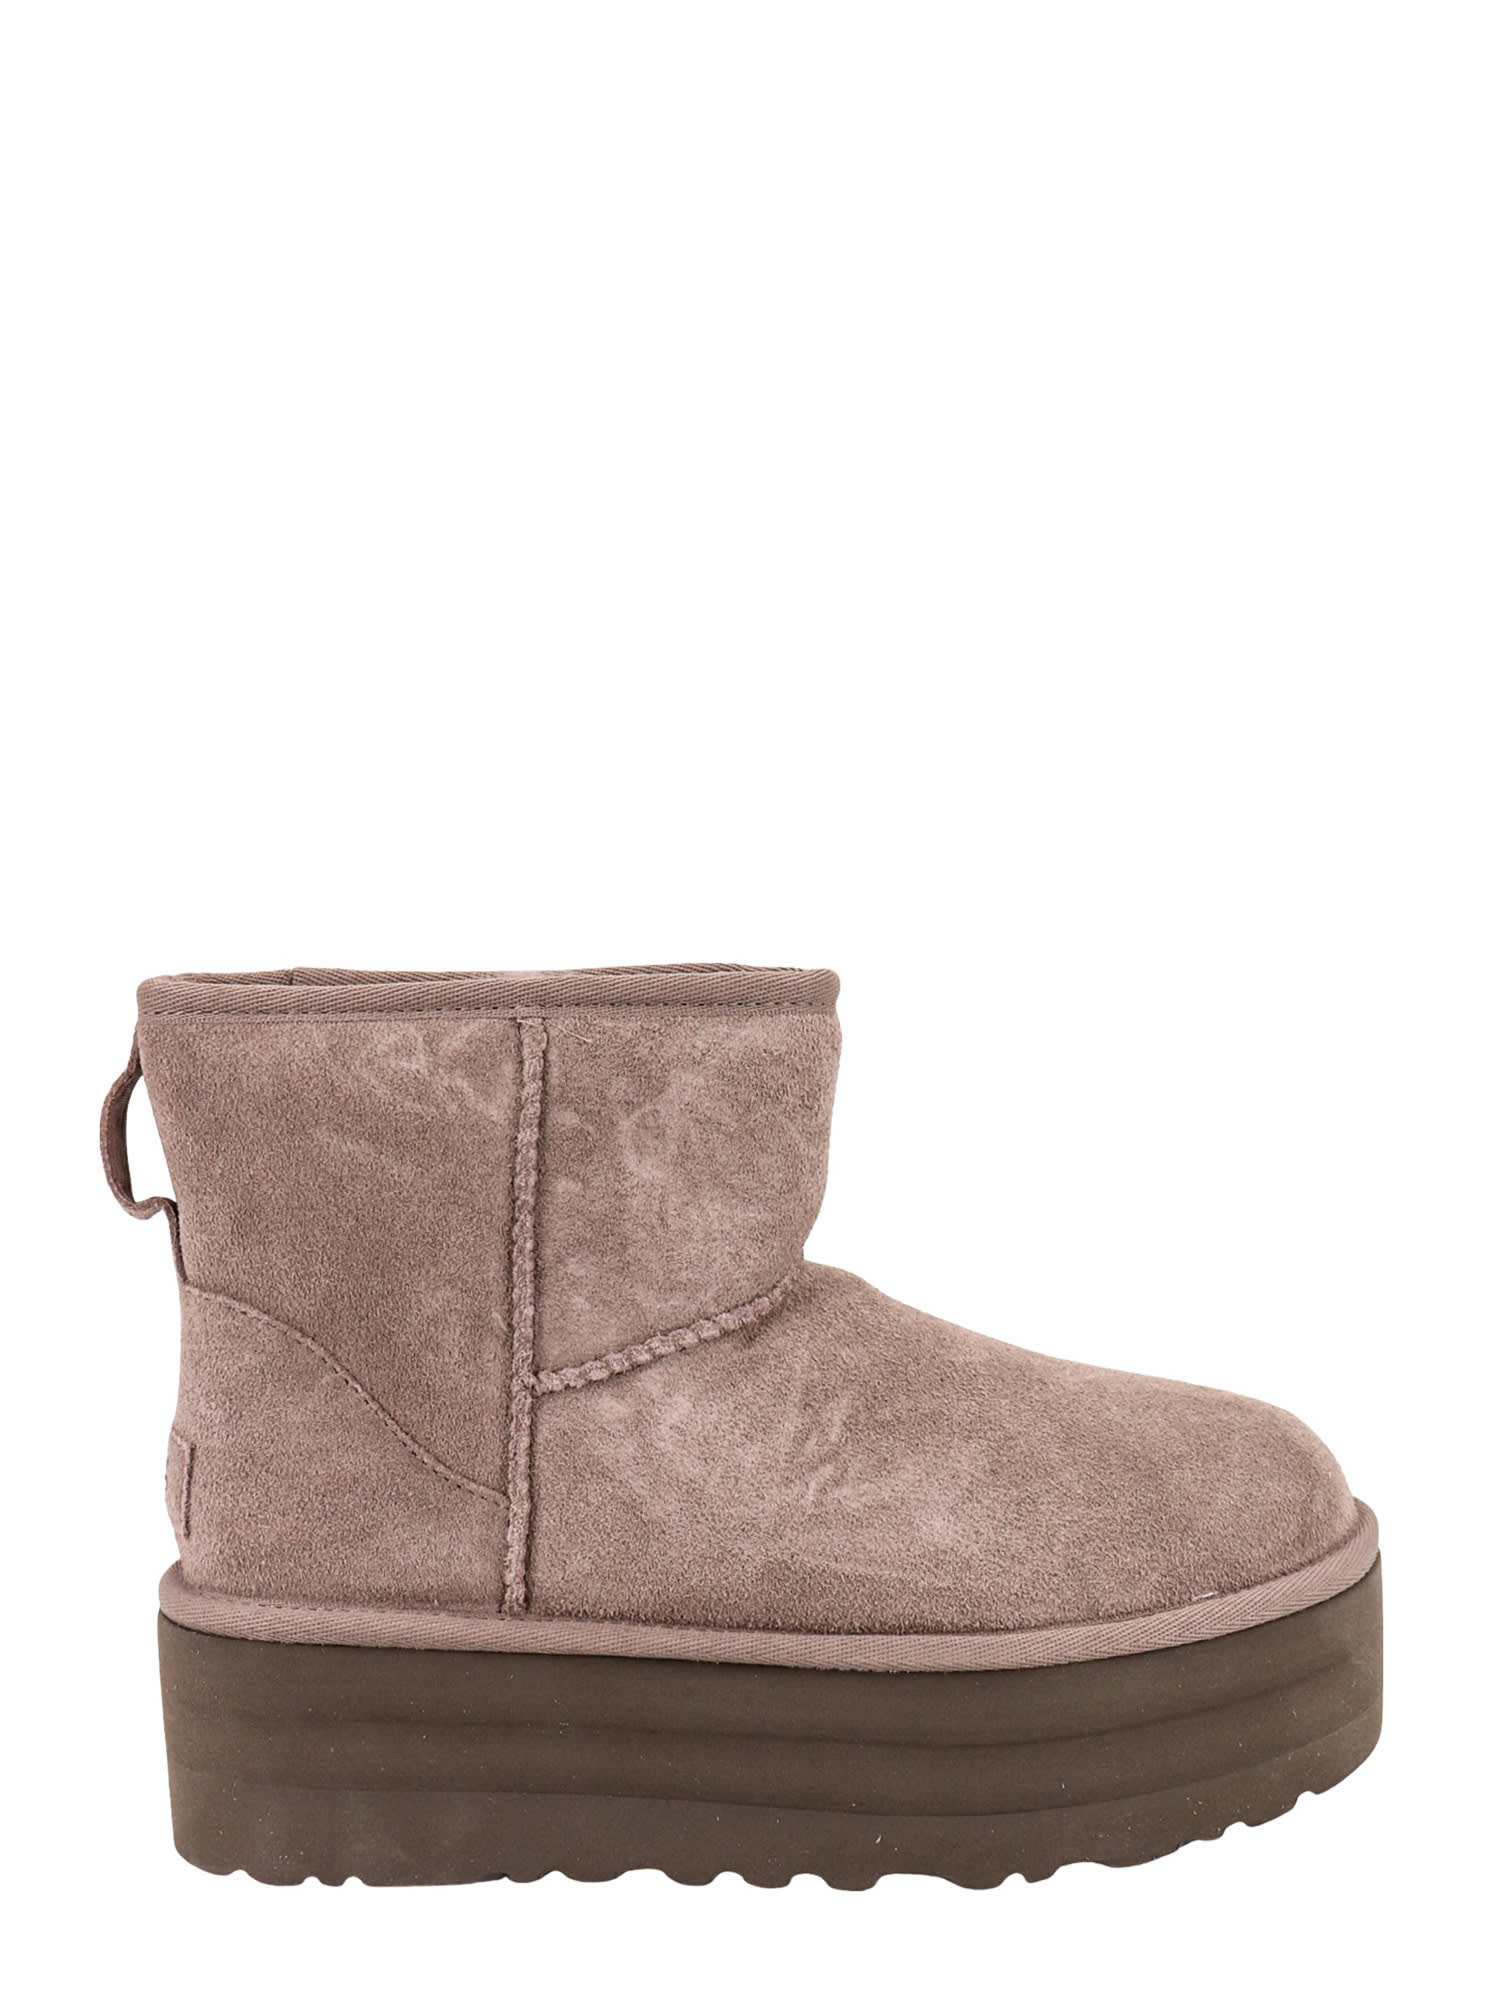 UGG ANKLE BOOTS